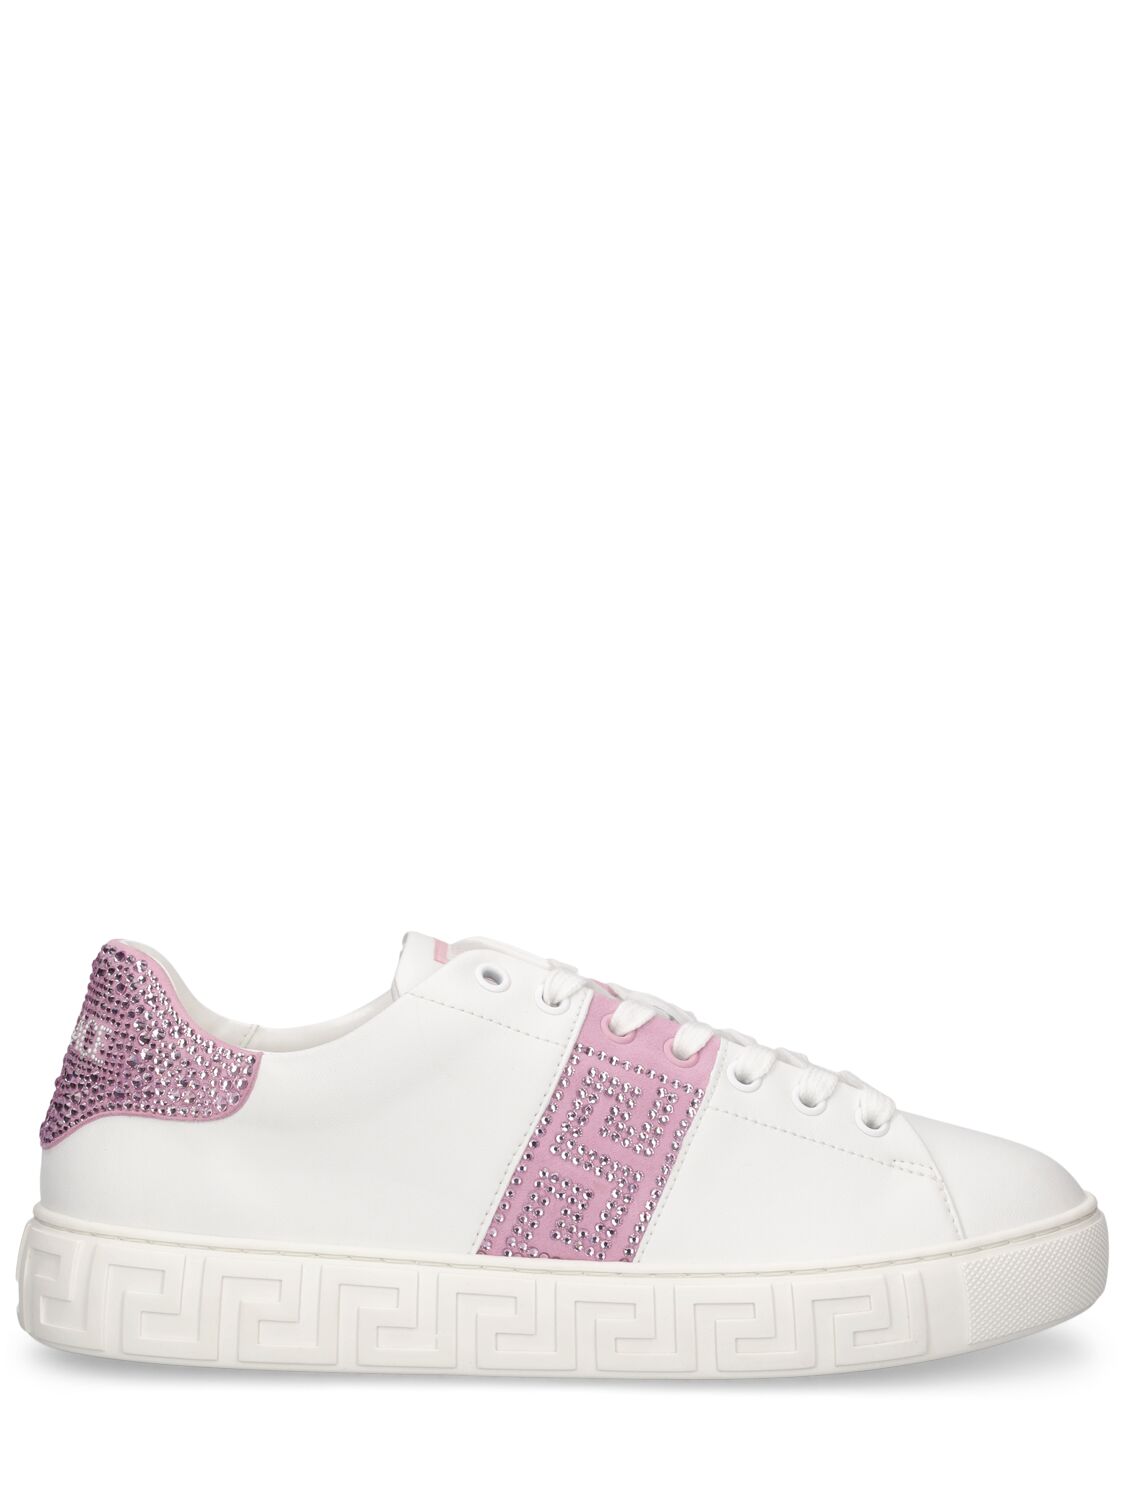 Faux Leather & Crystals Low Top Sneakers